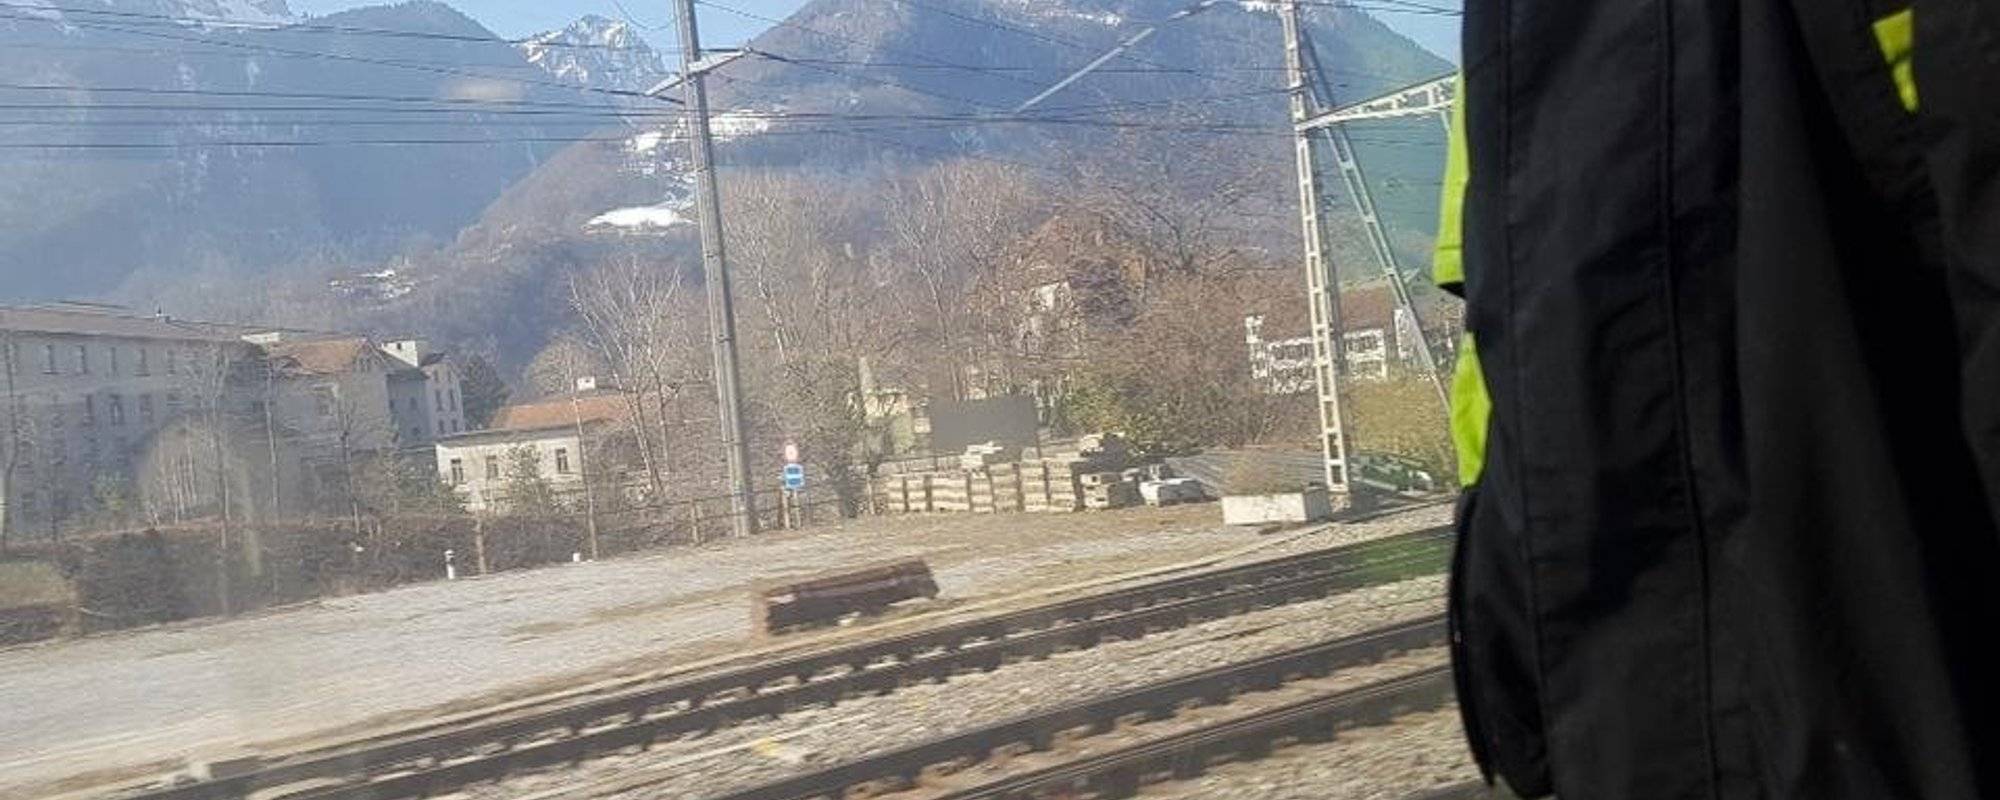 Crossing the Alps by train